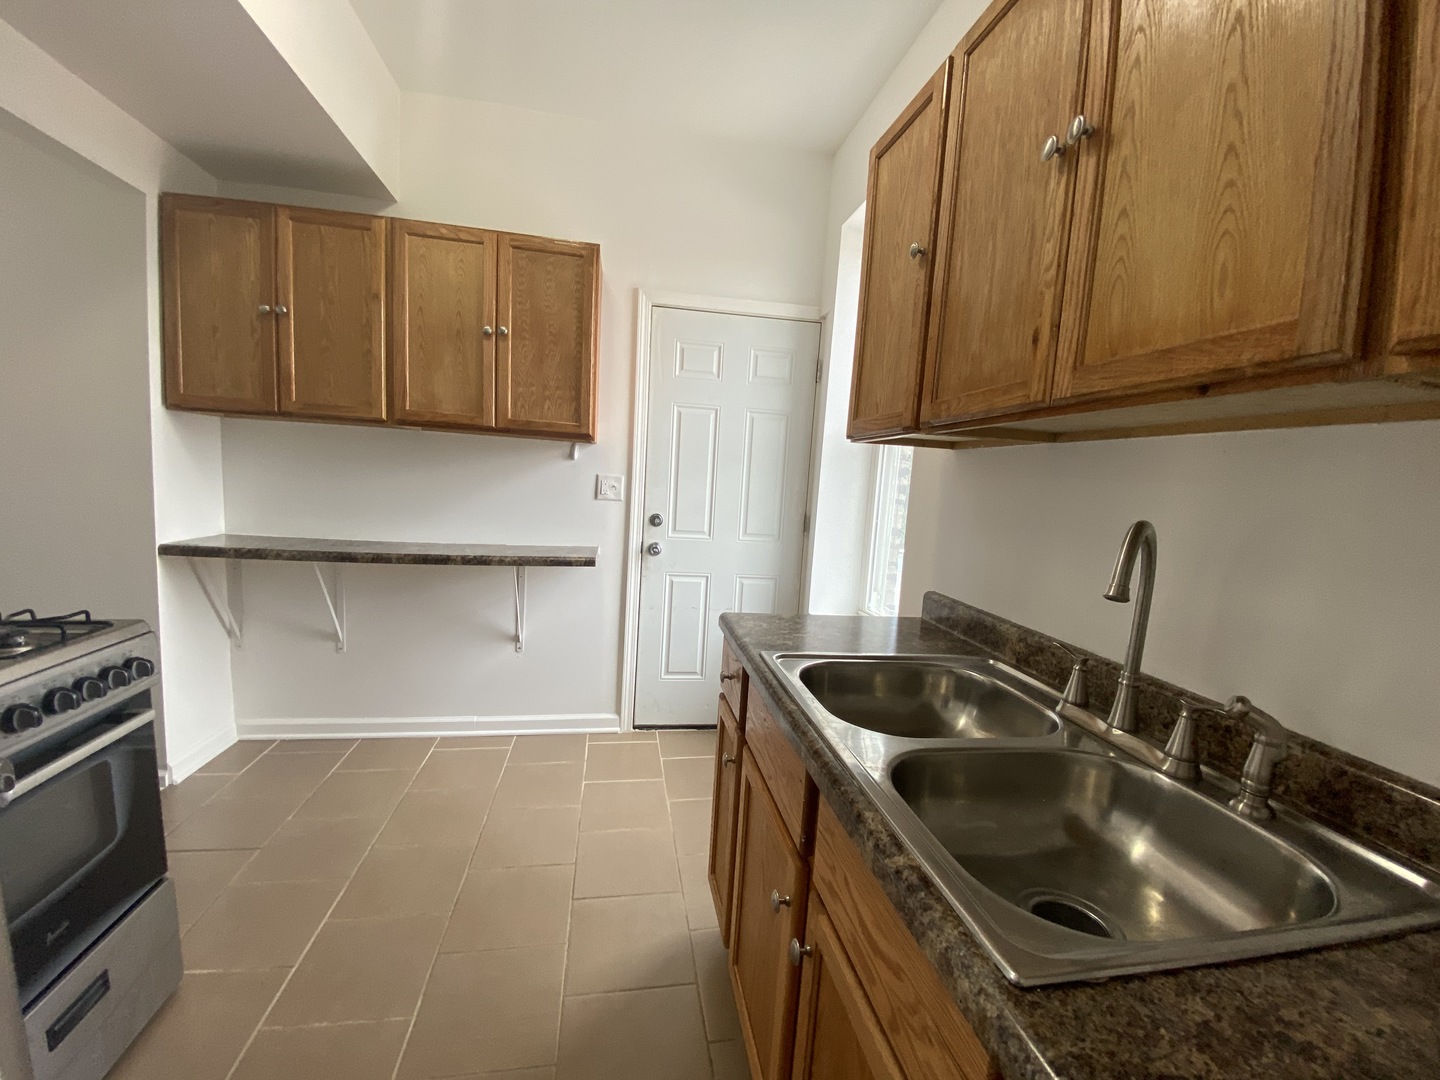 1609 N Lawndale Ave apartments for rent at AptAmigo